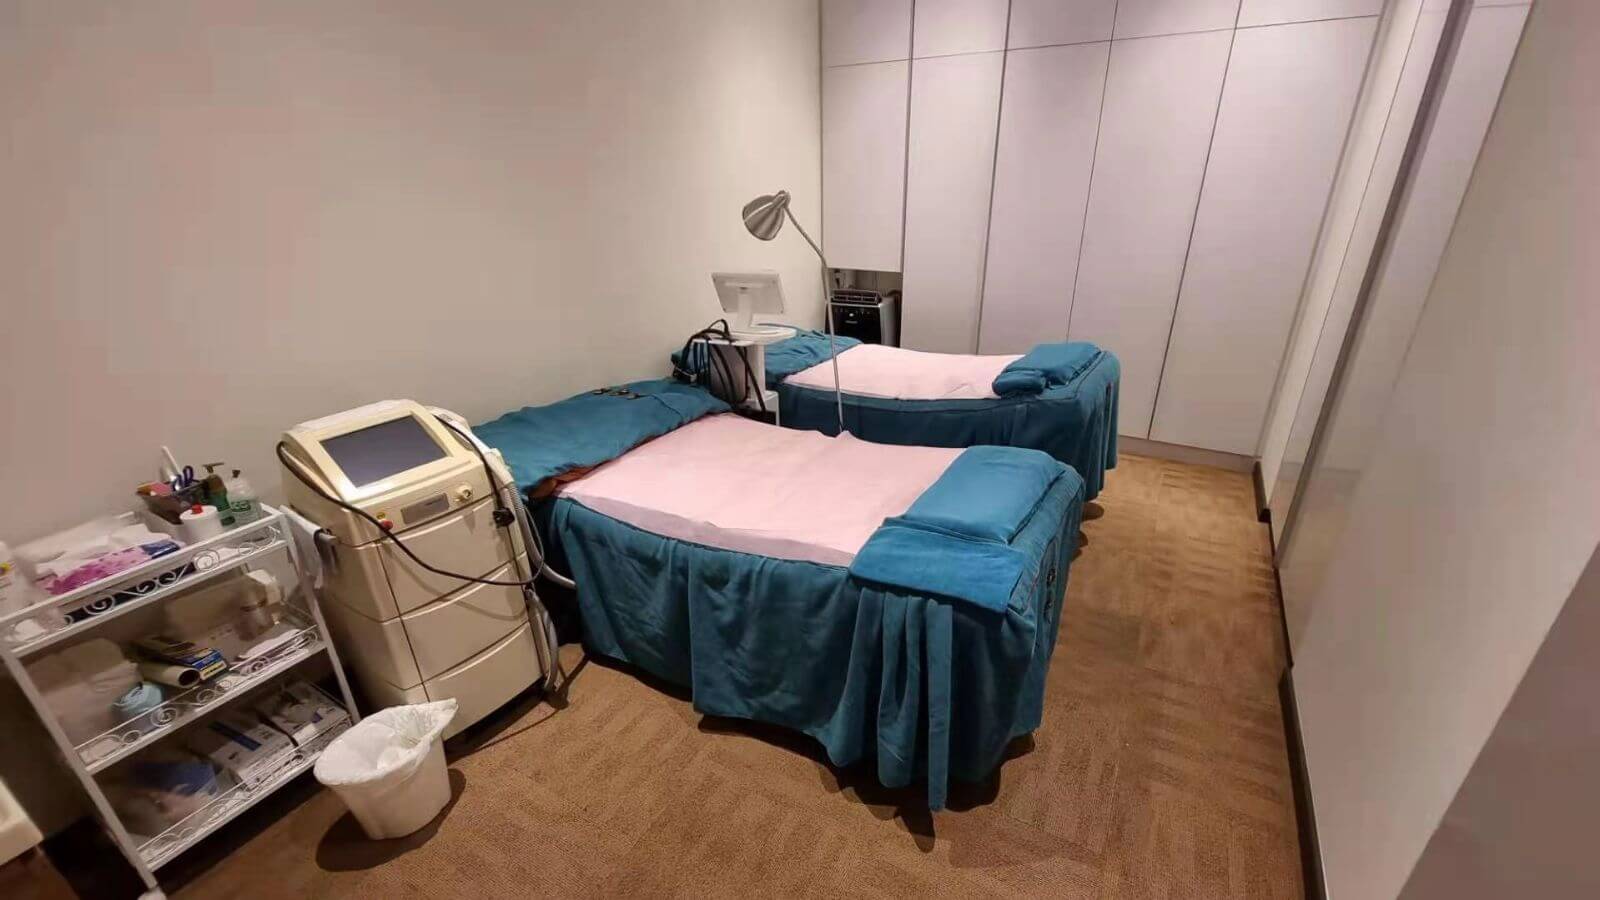 Very Profitable Aesthetic Clinic With All Equipment And License And Employees For Takeover高利润医美诊所转让